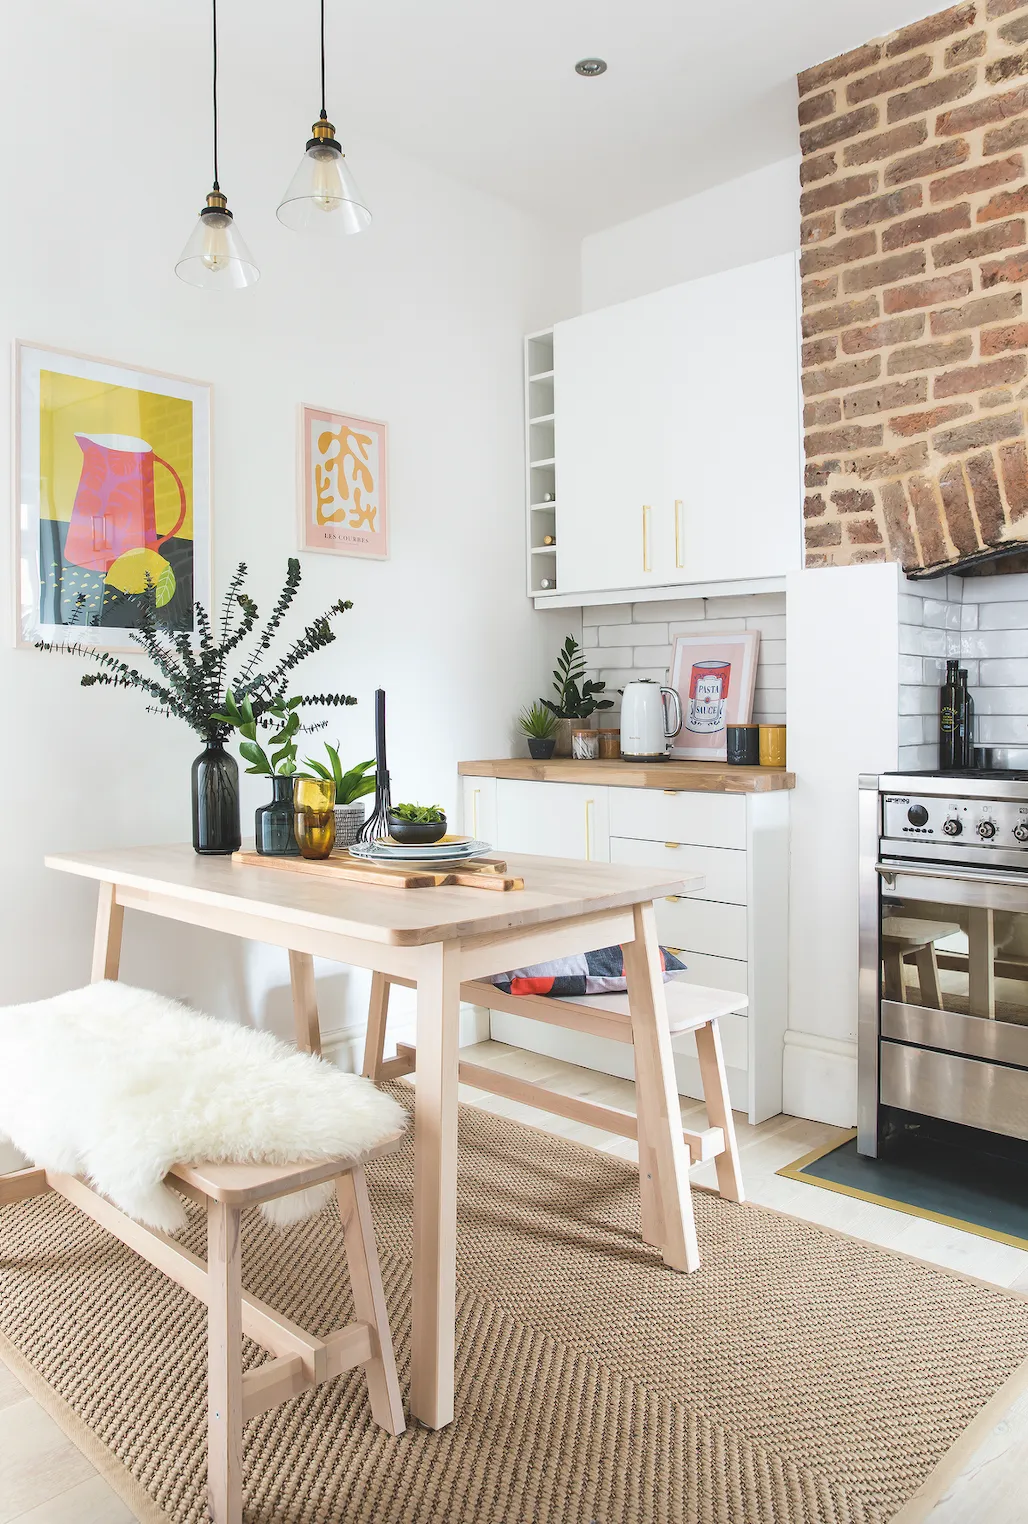 Squeezing in a dining table was high on the list of priorities, so Nadia chose a compact table with matching benches to stop the room looking too cramped